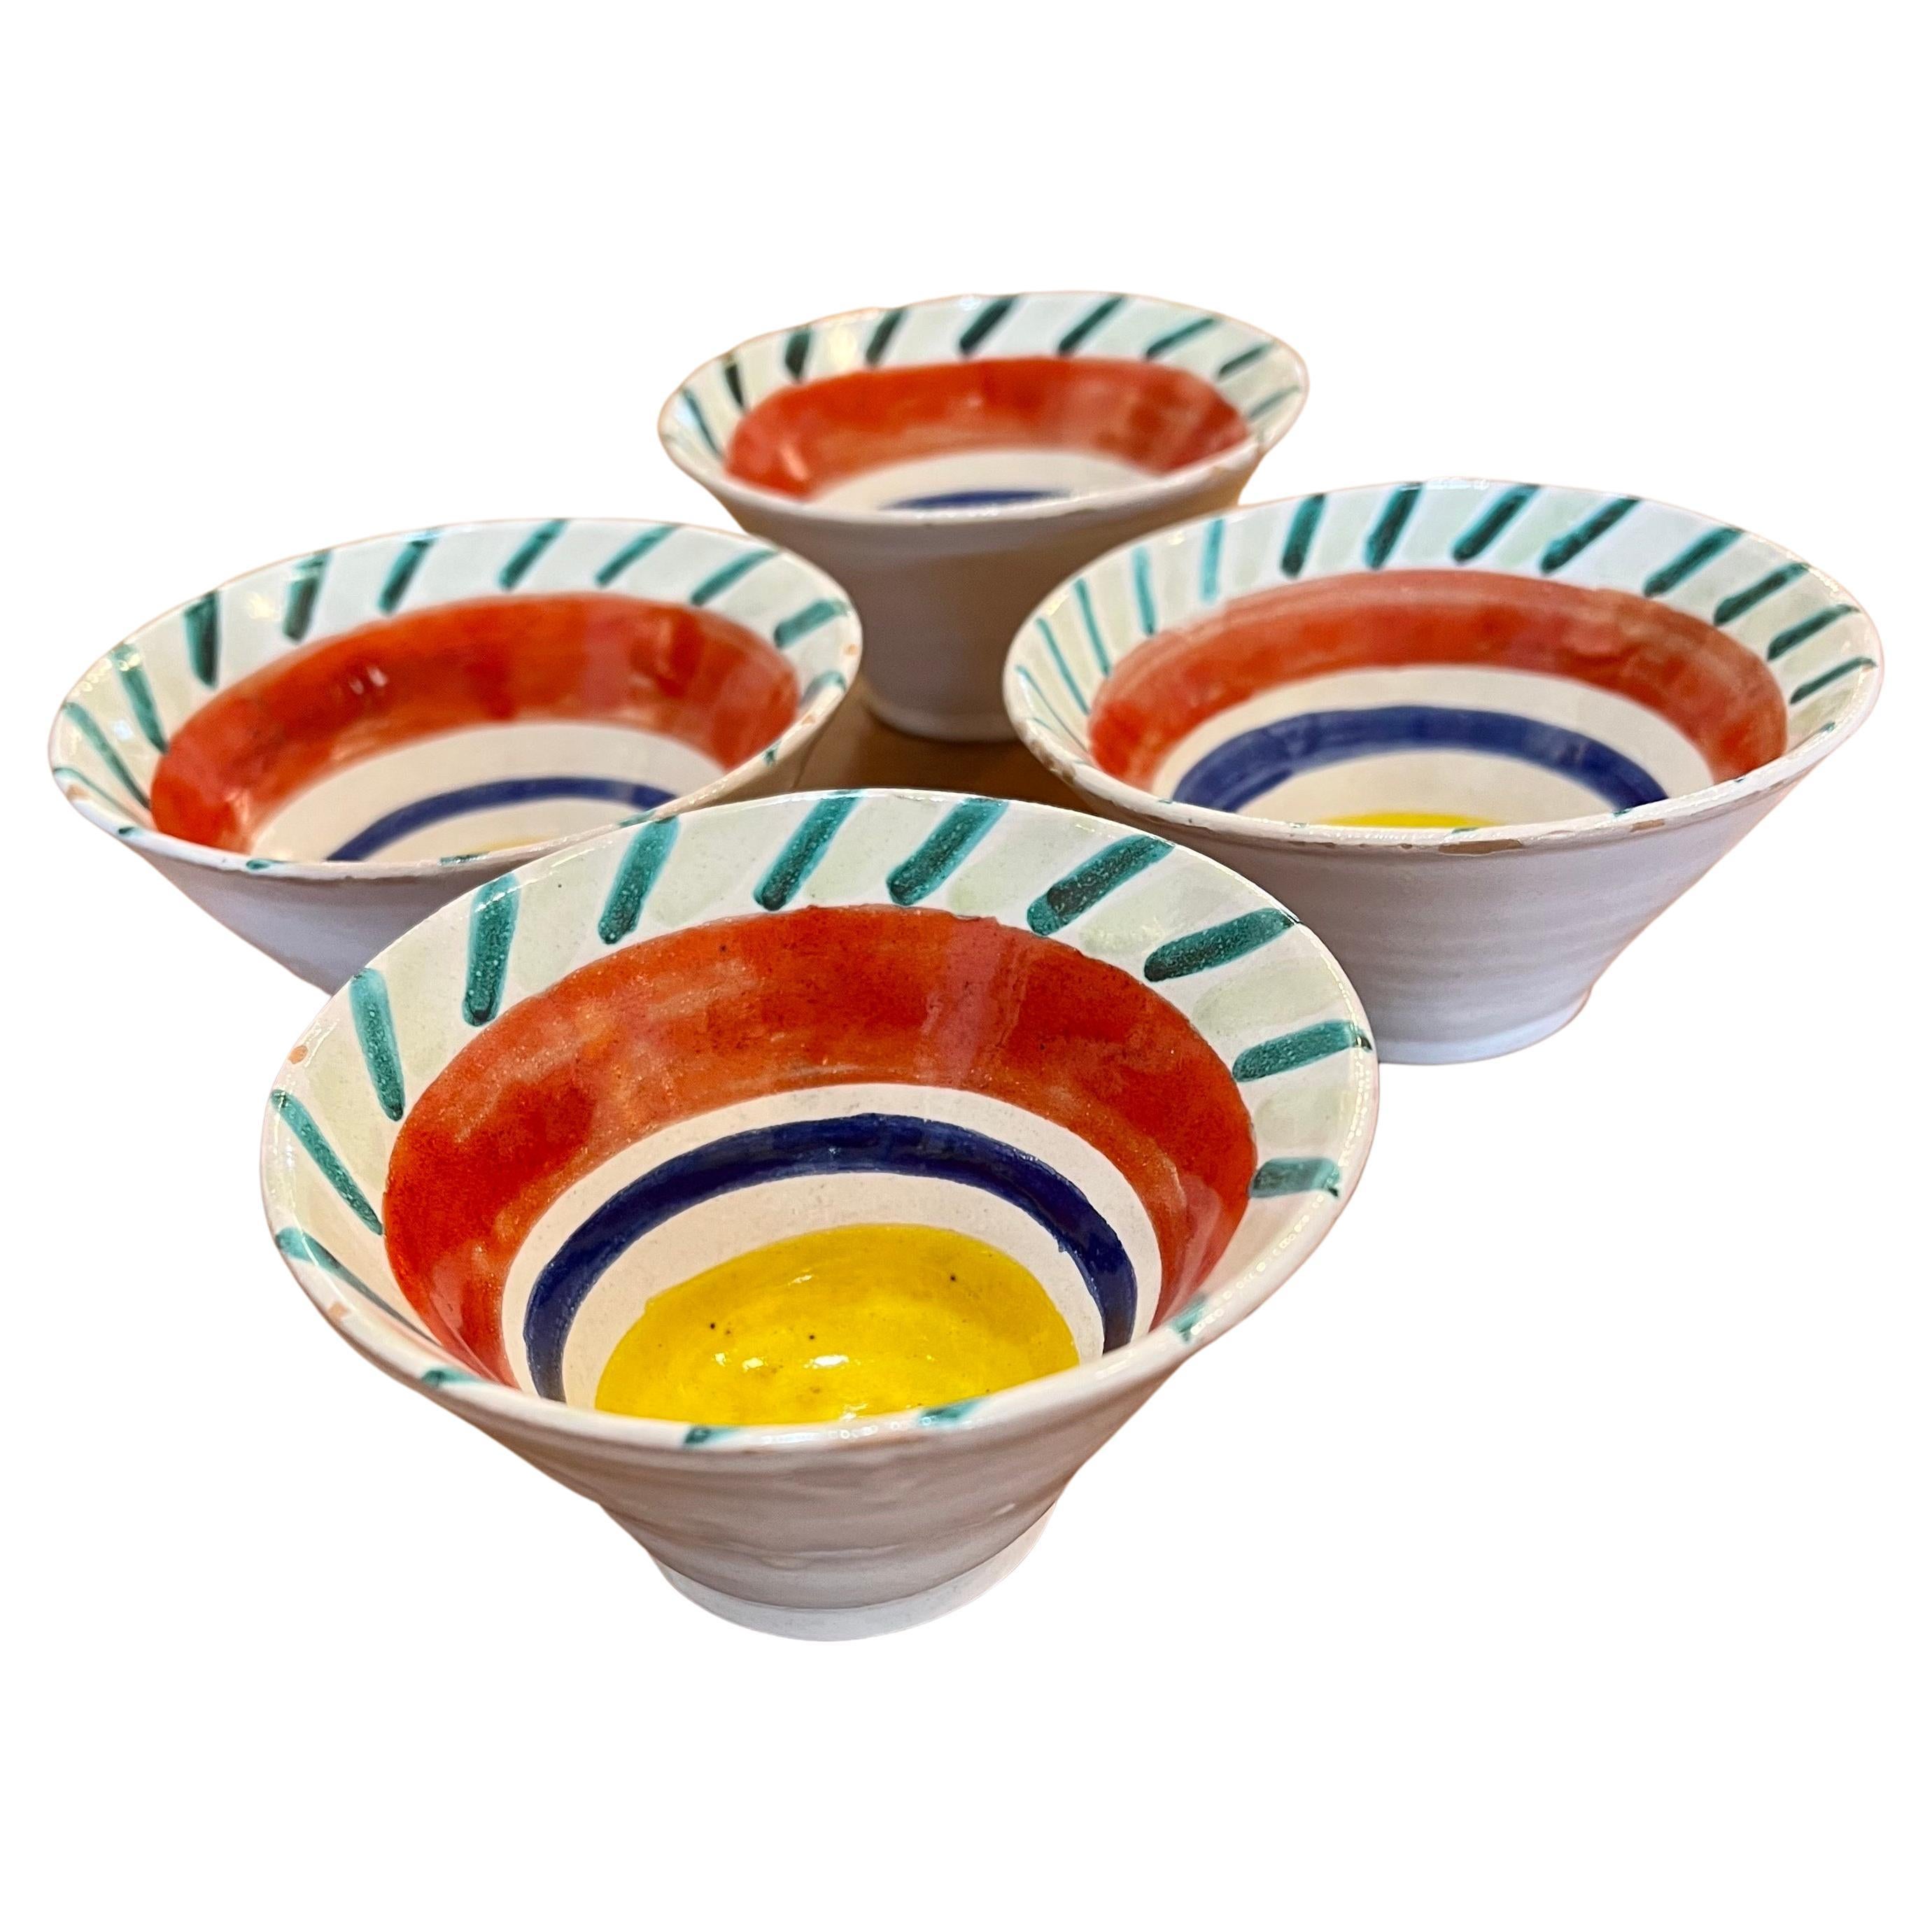 Set of 4 rare decorative hand-painted Italian dessert cups by DeSimone, circa the 1960s. The mugs are in good vintage condition.